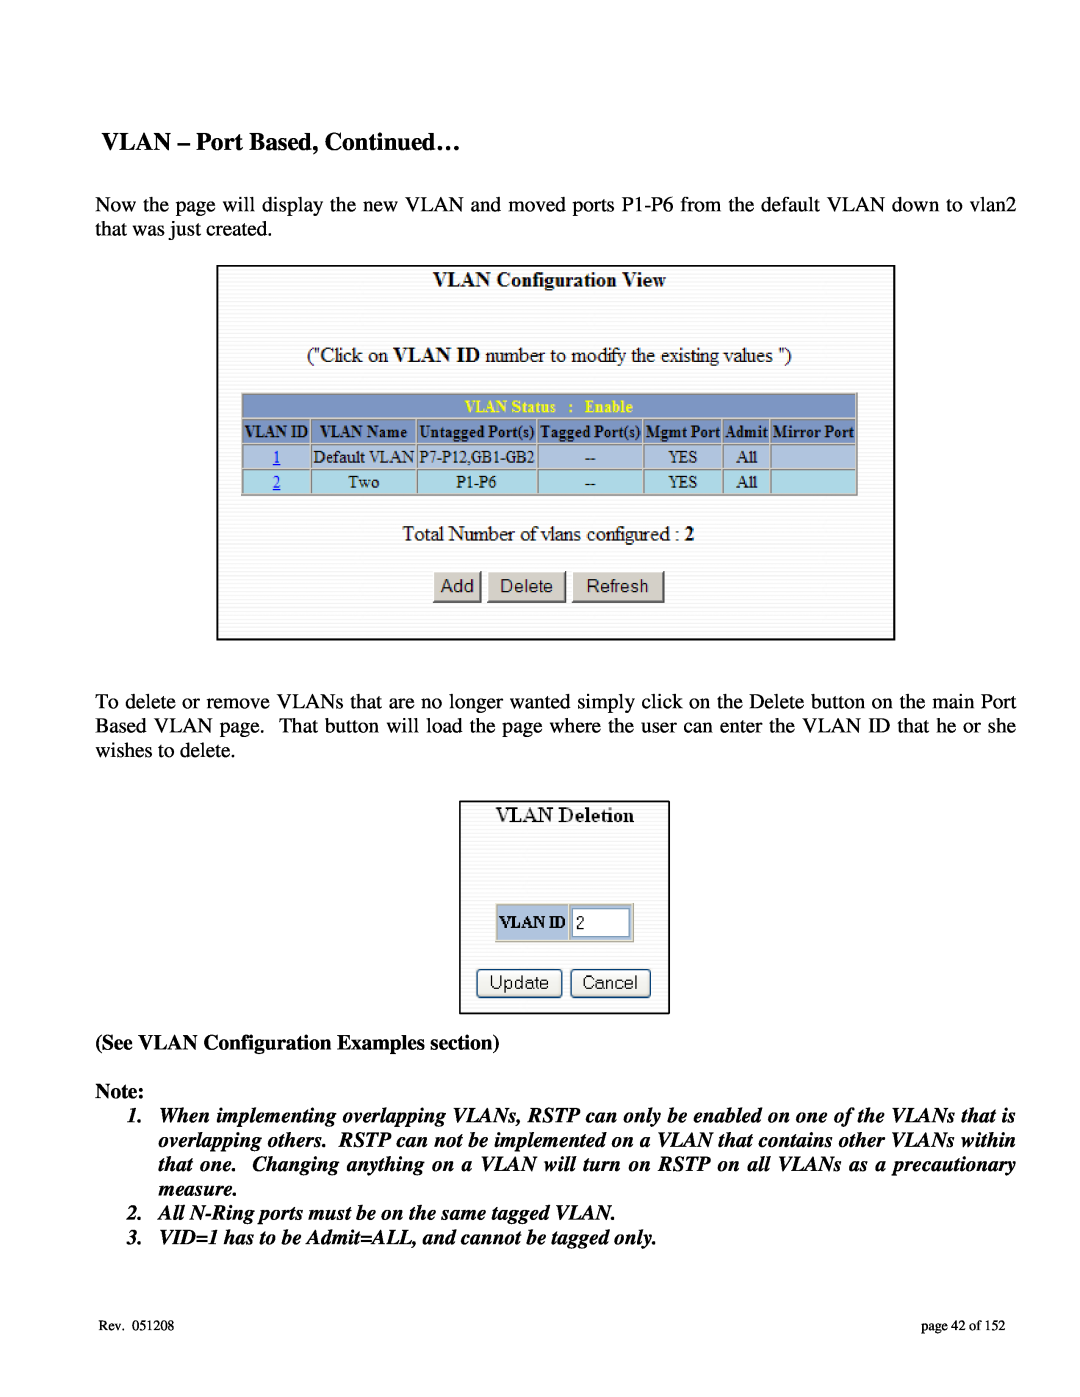 Gigabyte 7014 user manual VLAN - Port Based, Continued…, See VLAN Configuration Examples section, page 42 of 